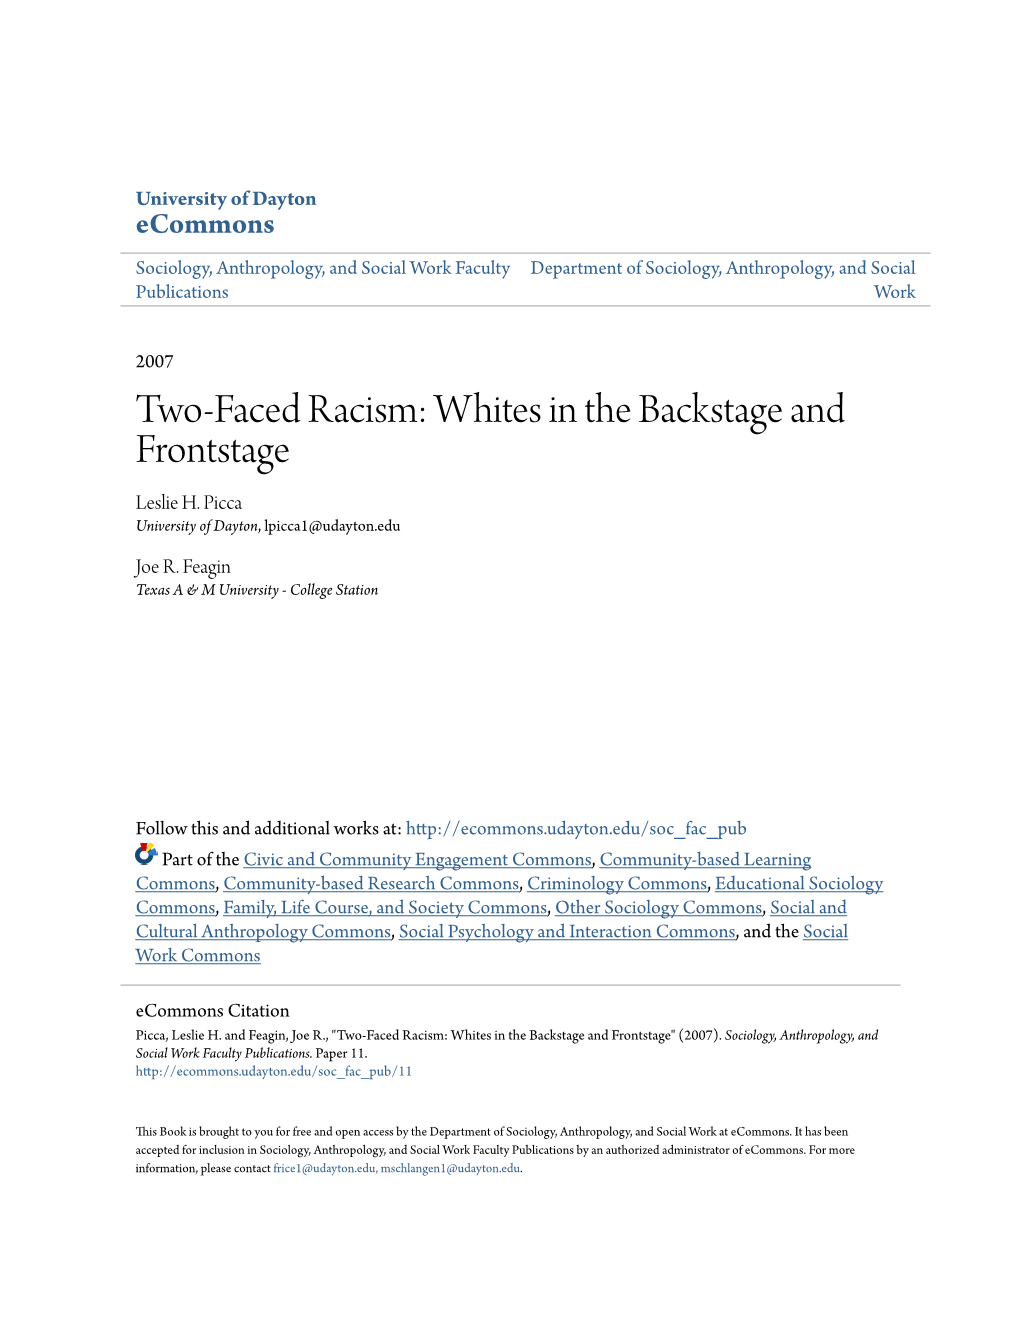 Two-Faced Racism: Whites in the Backstage and Frontstage Leslie H